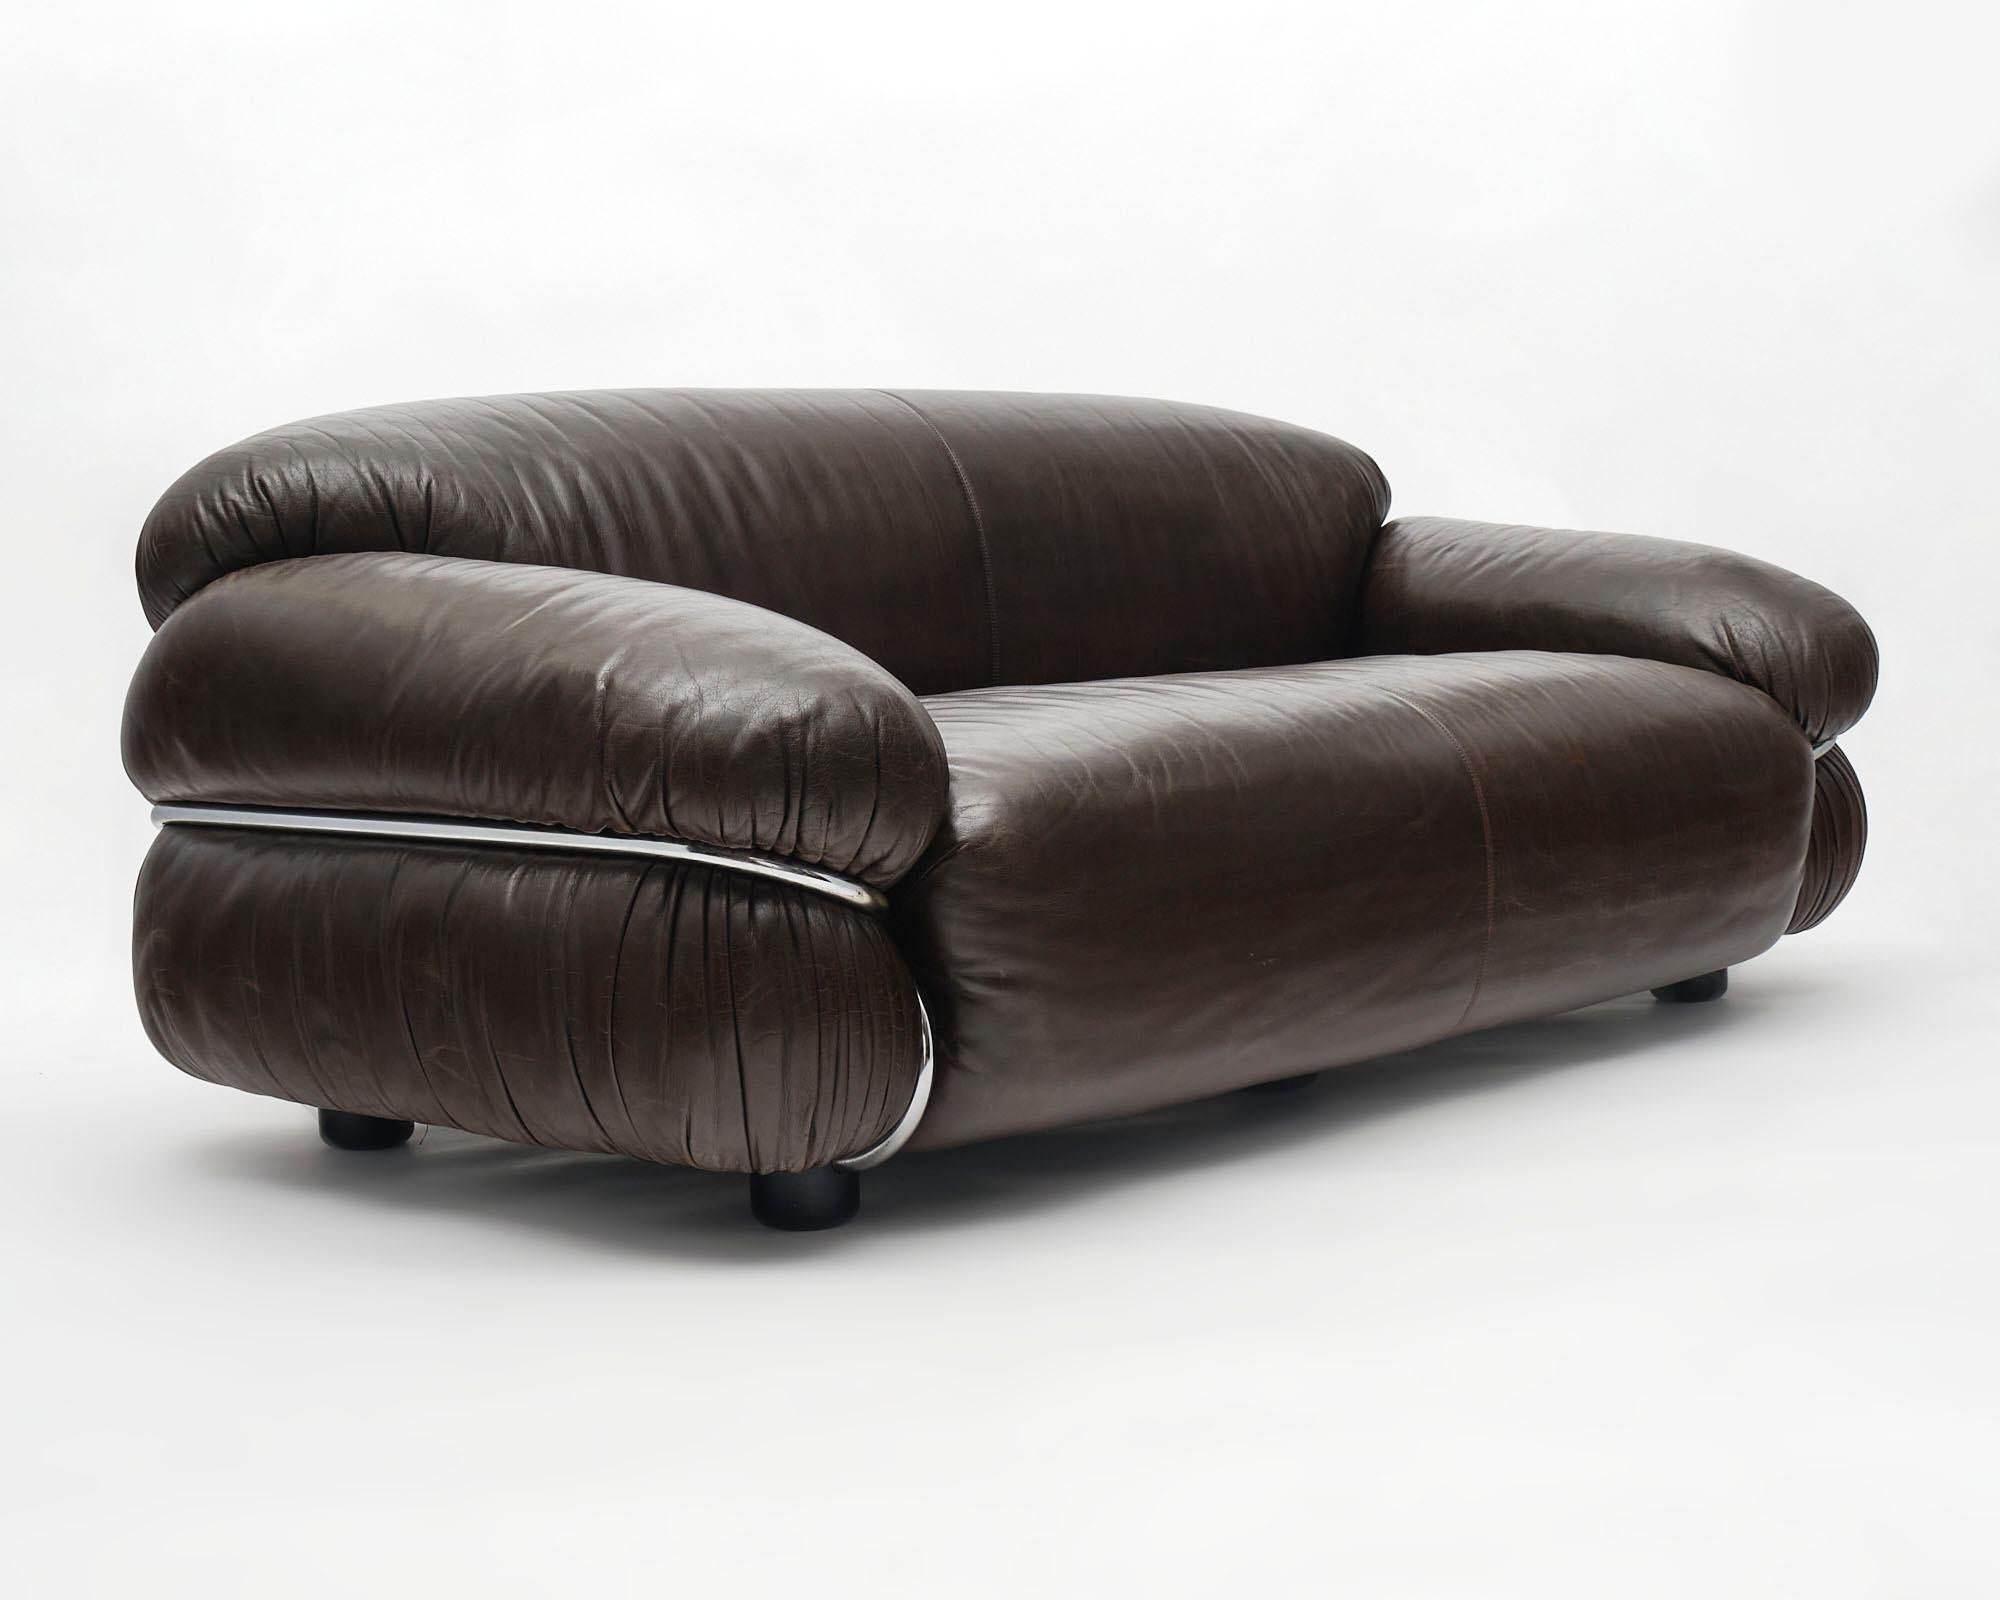 Italian sofa, by Gianfranco Frattini for Cassina. The supple leather, in great condition, lends itself to the voluptuous form. This sofaa rests in a bent tubular chromed structure that is in great condition.